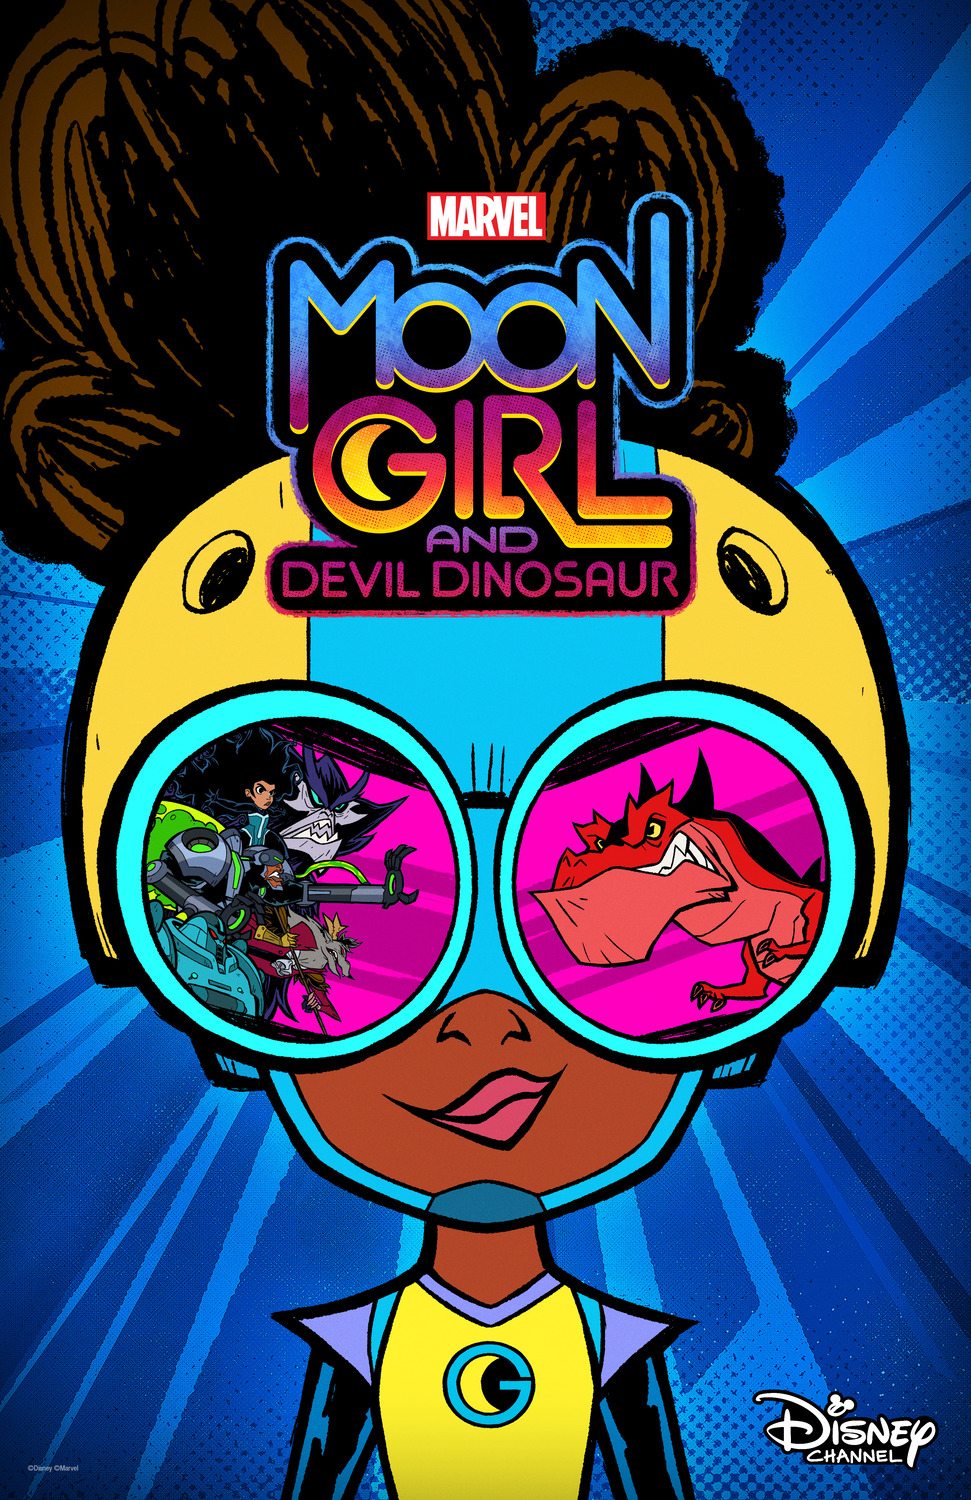 Extra Large Movie Poster Image for Marvel's Moon Girl and Devil Dinosaur (#1 of 6)